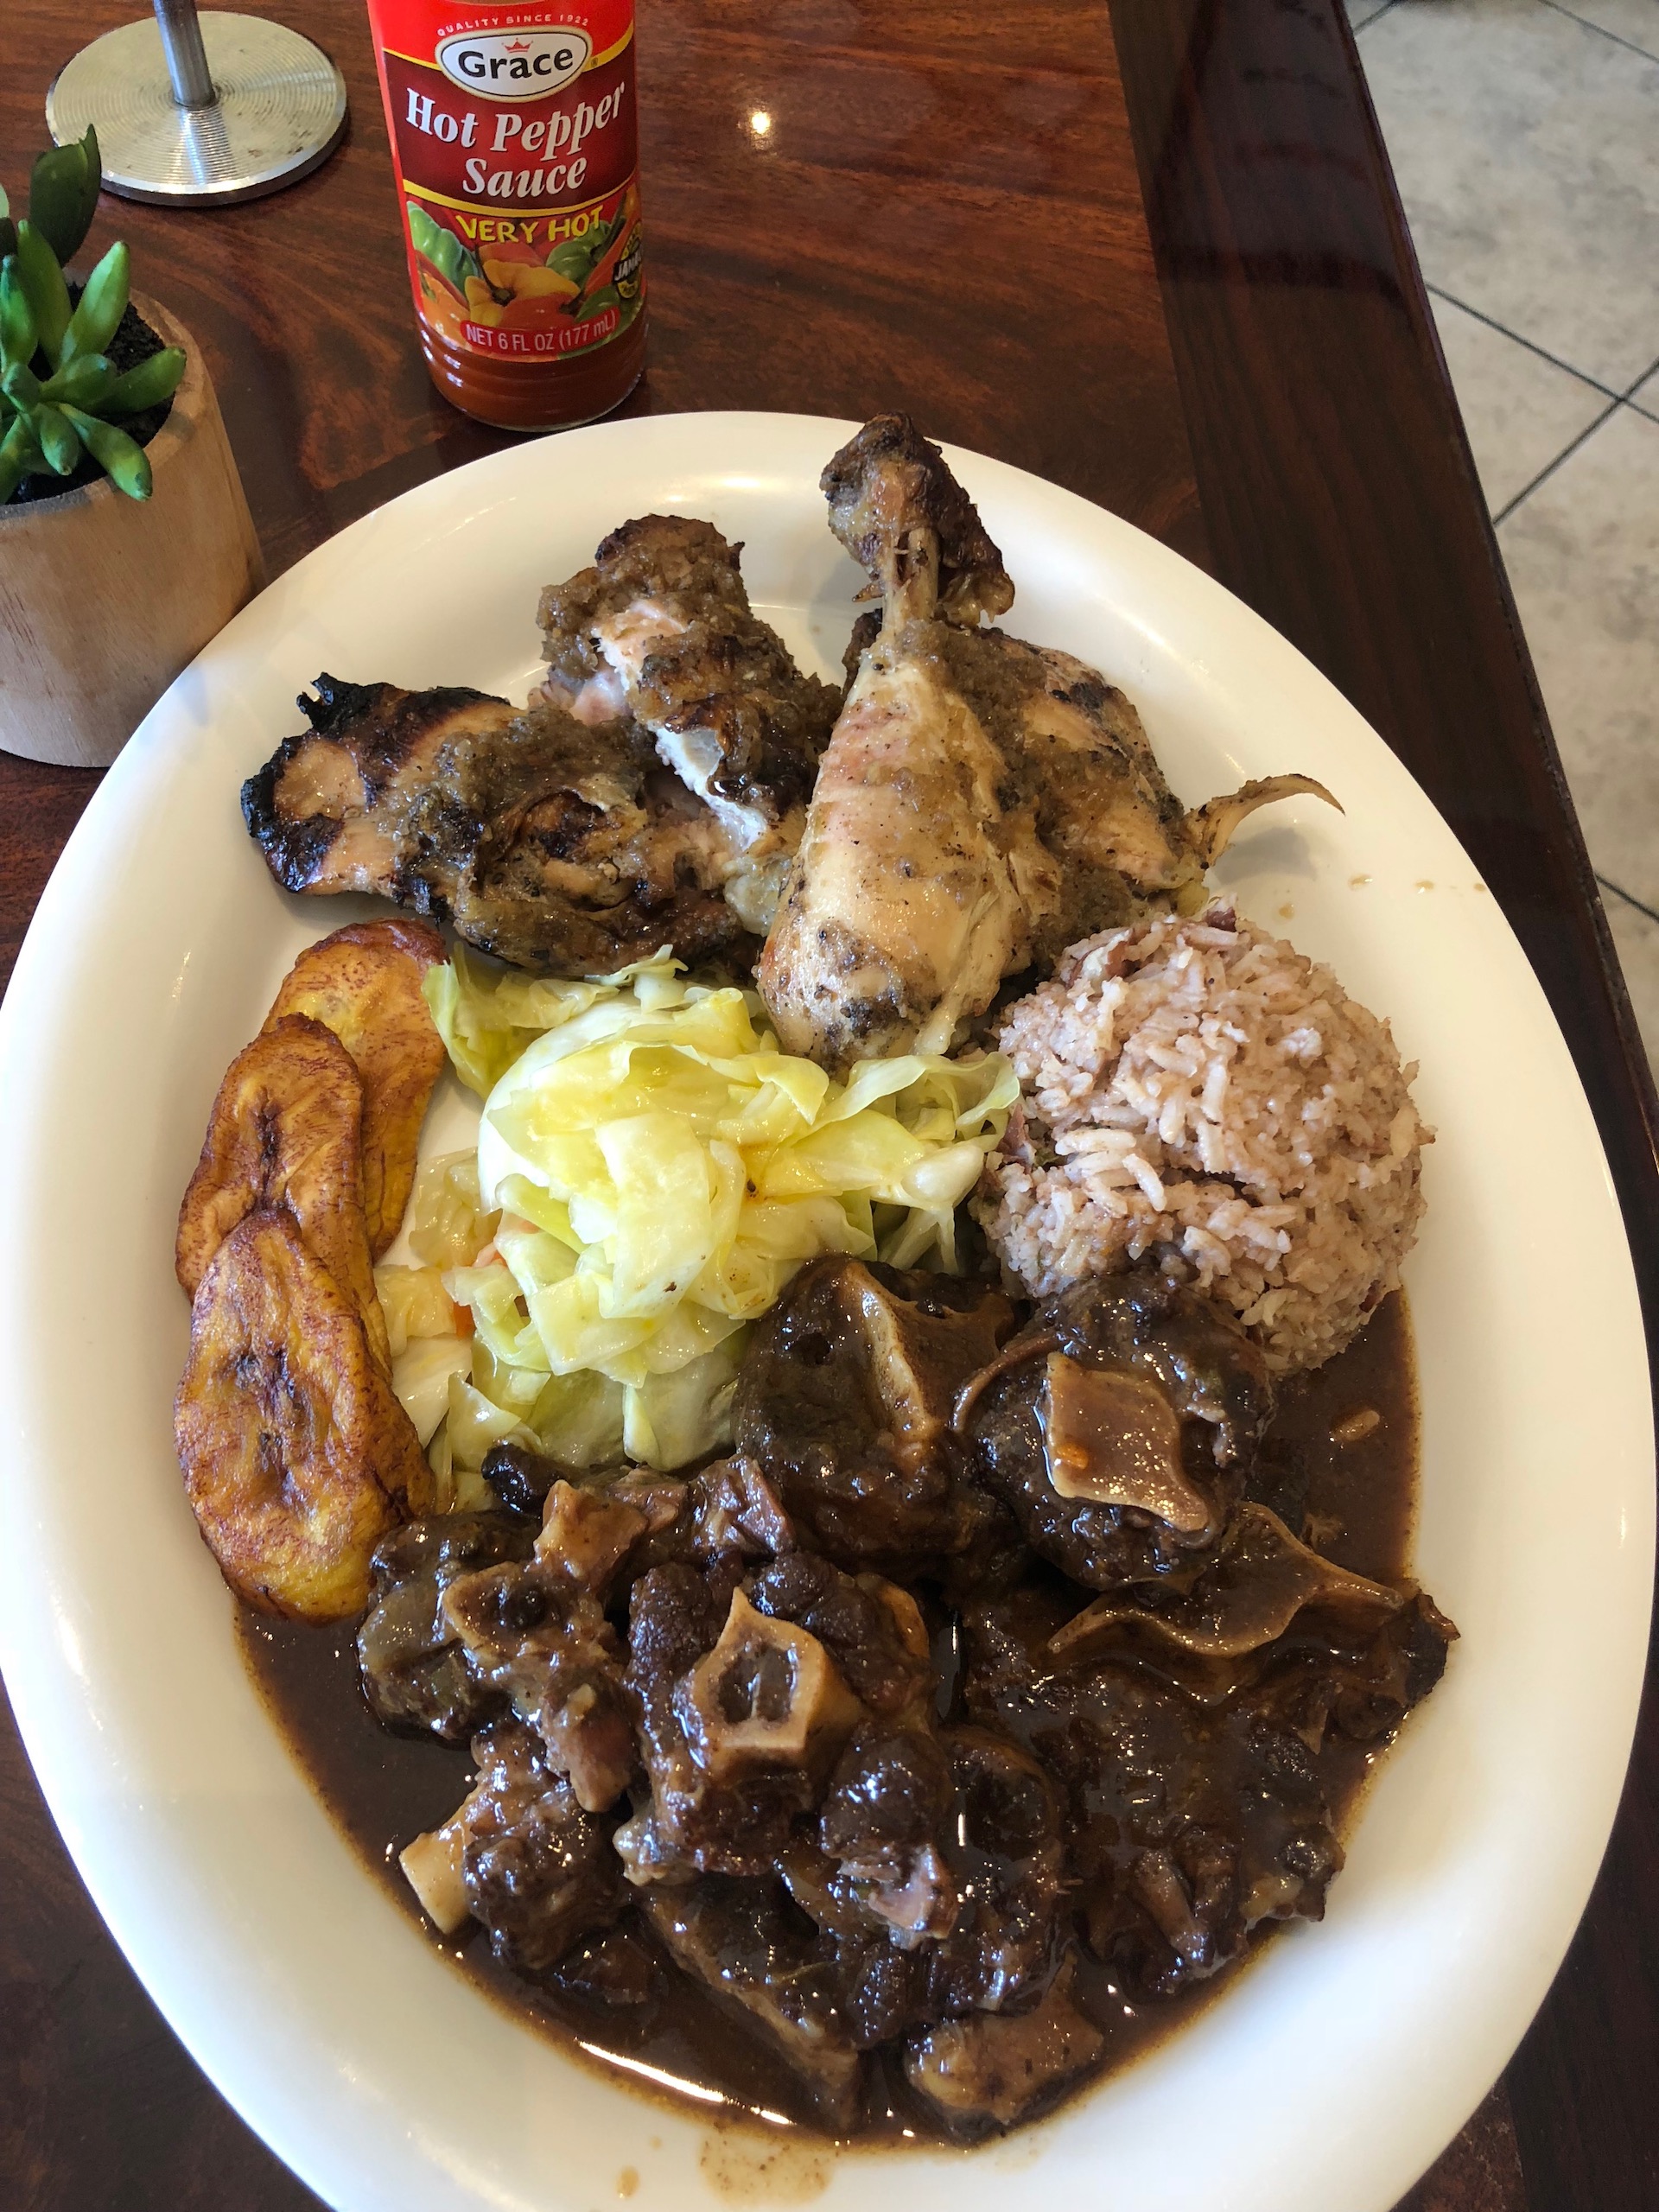 A jerk chicken and oxtail combo with plantains and rice & beans at Flavas Jamaican Grill.